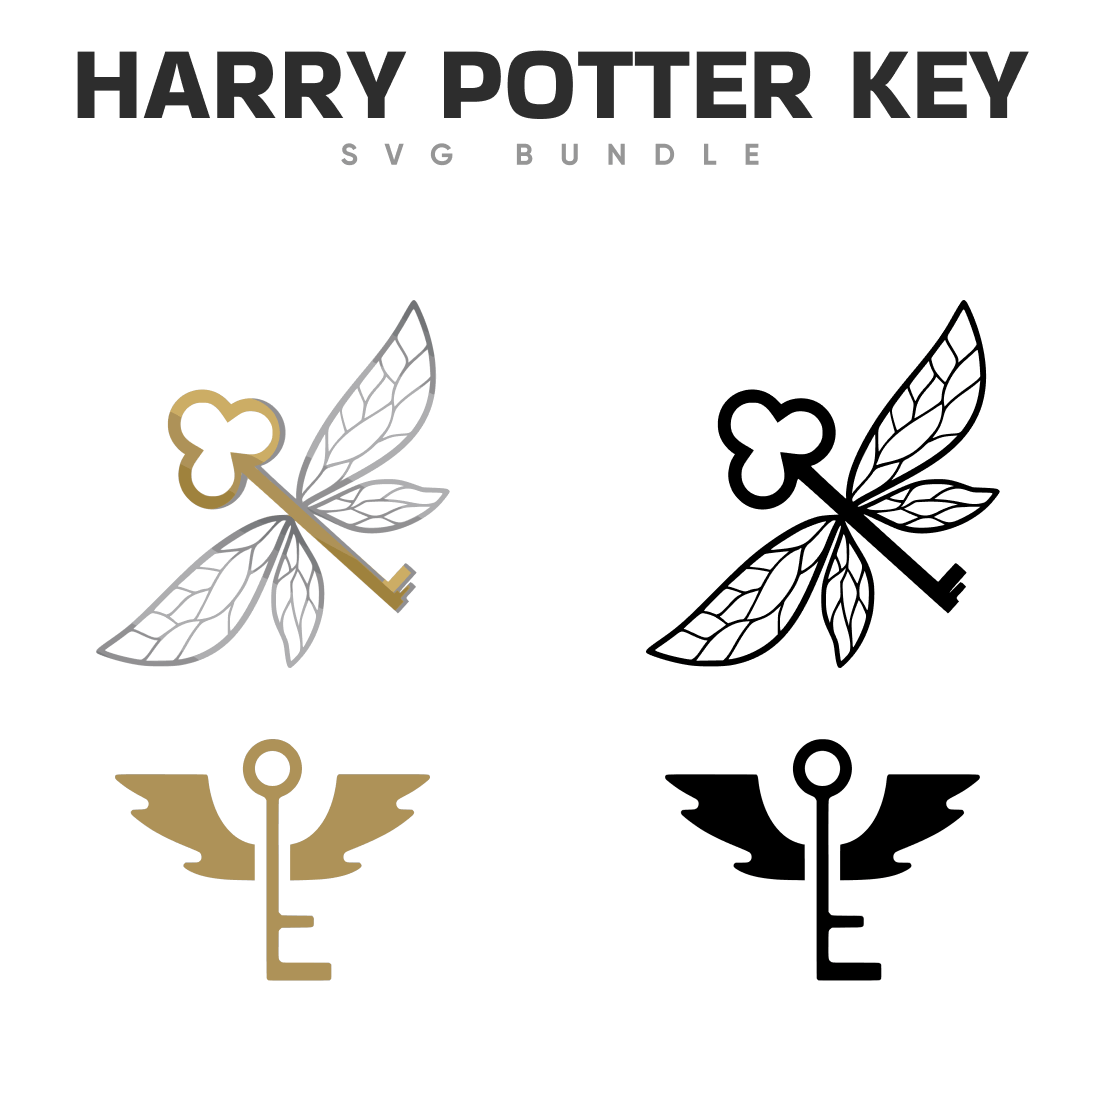 Four gold and black Harry Potter themed keys.